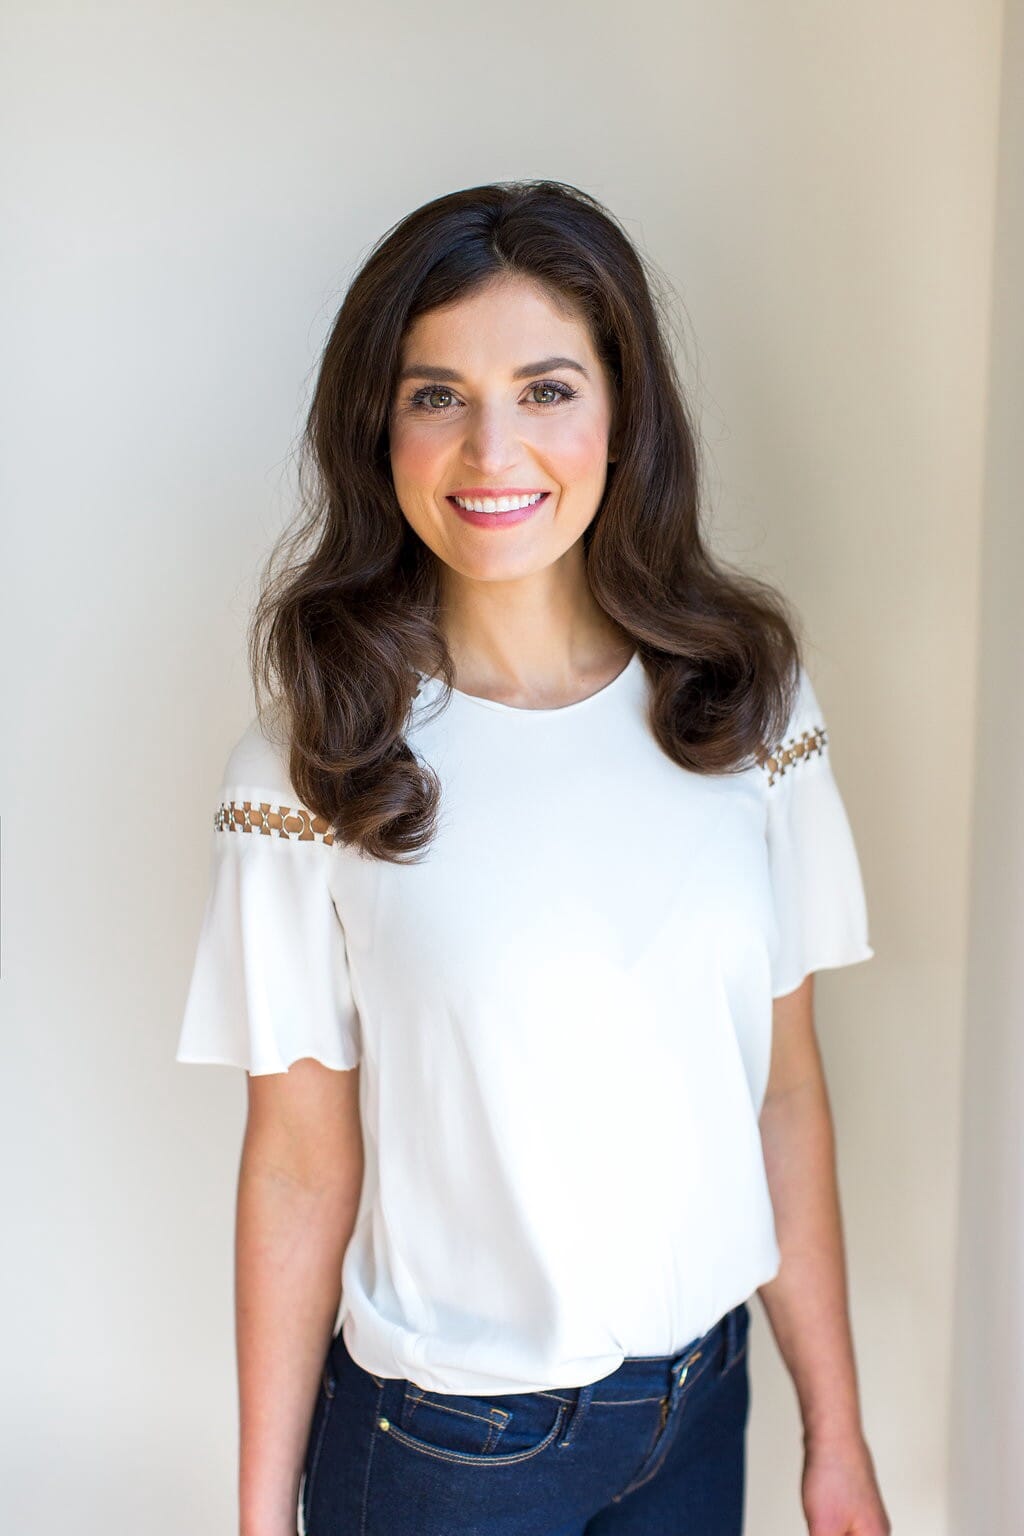 Julie Sawaya is the Co-Founder and Co-CEO of Needed